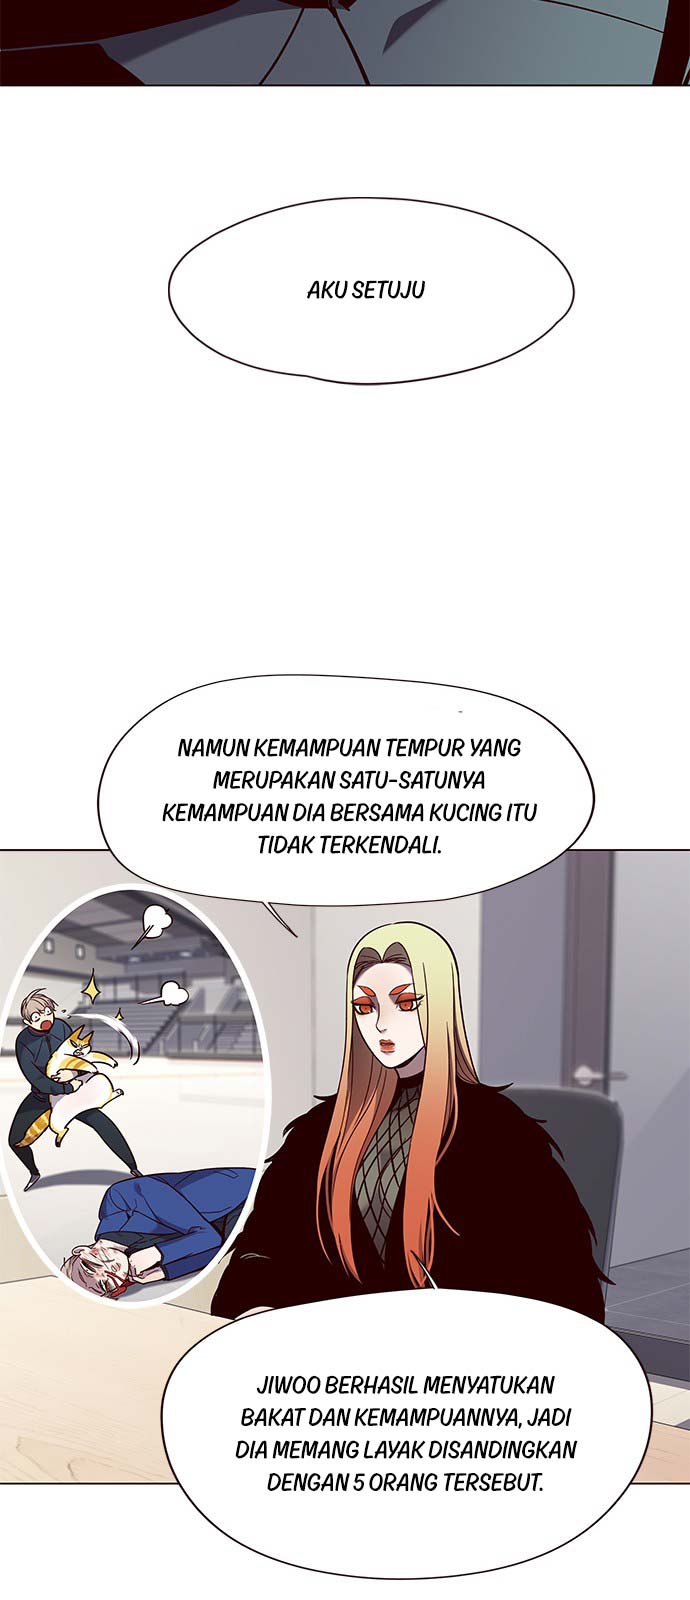 Eleceed Chapter 90